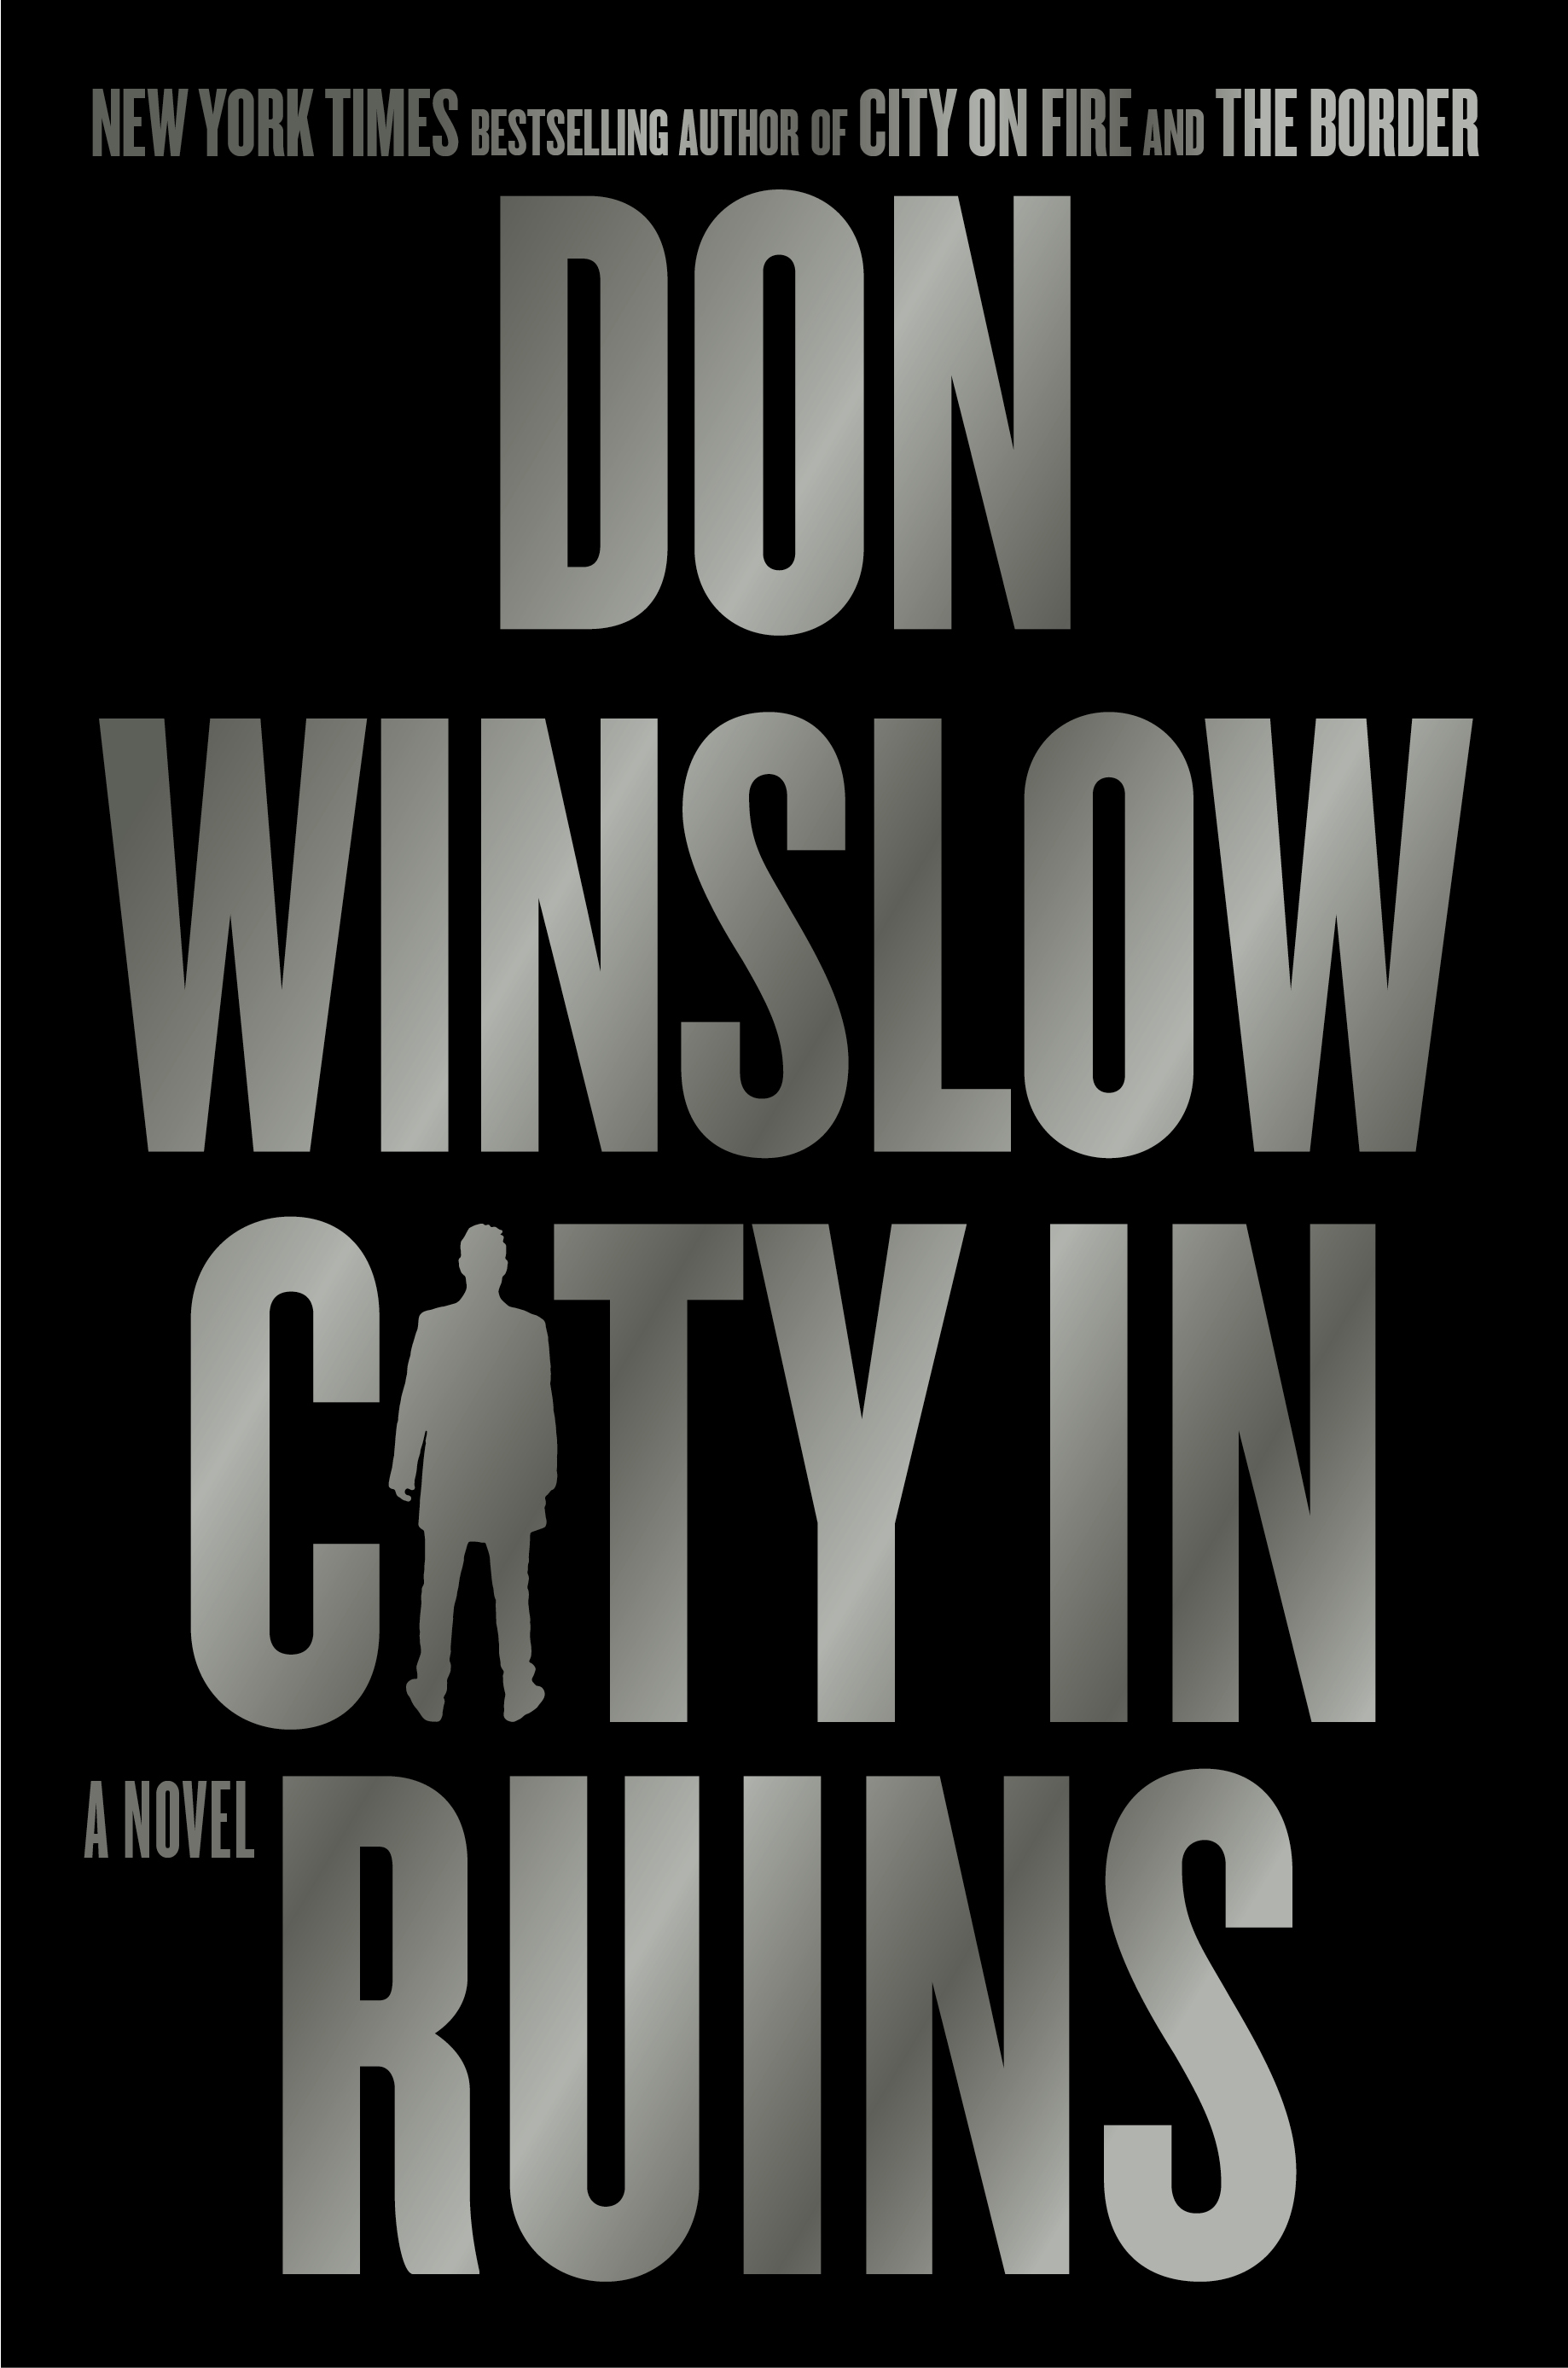 The cover of Don Winslow's "City In Ruins."